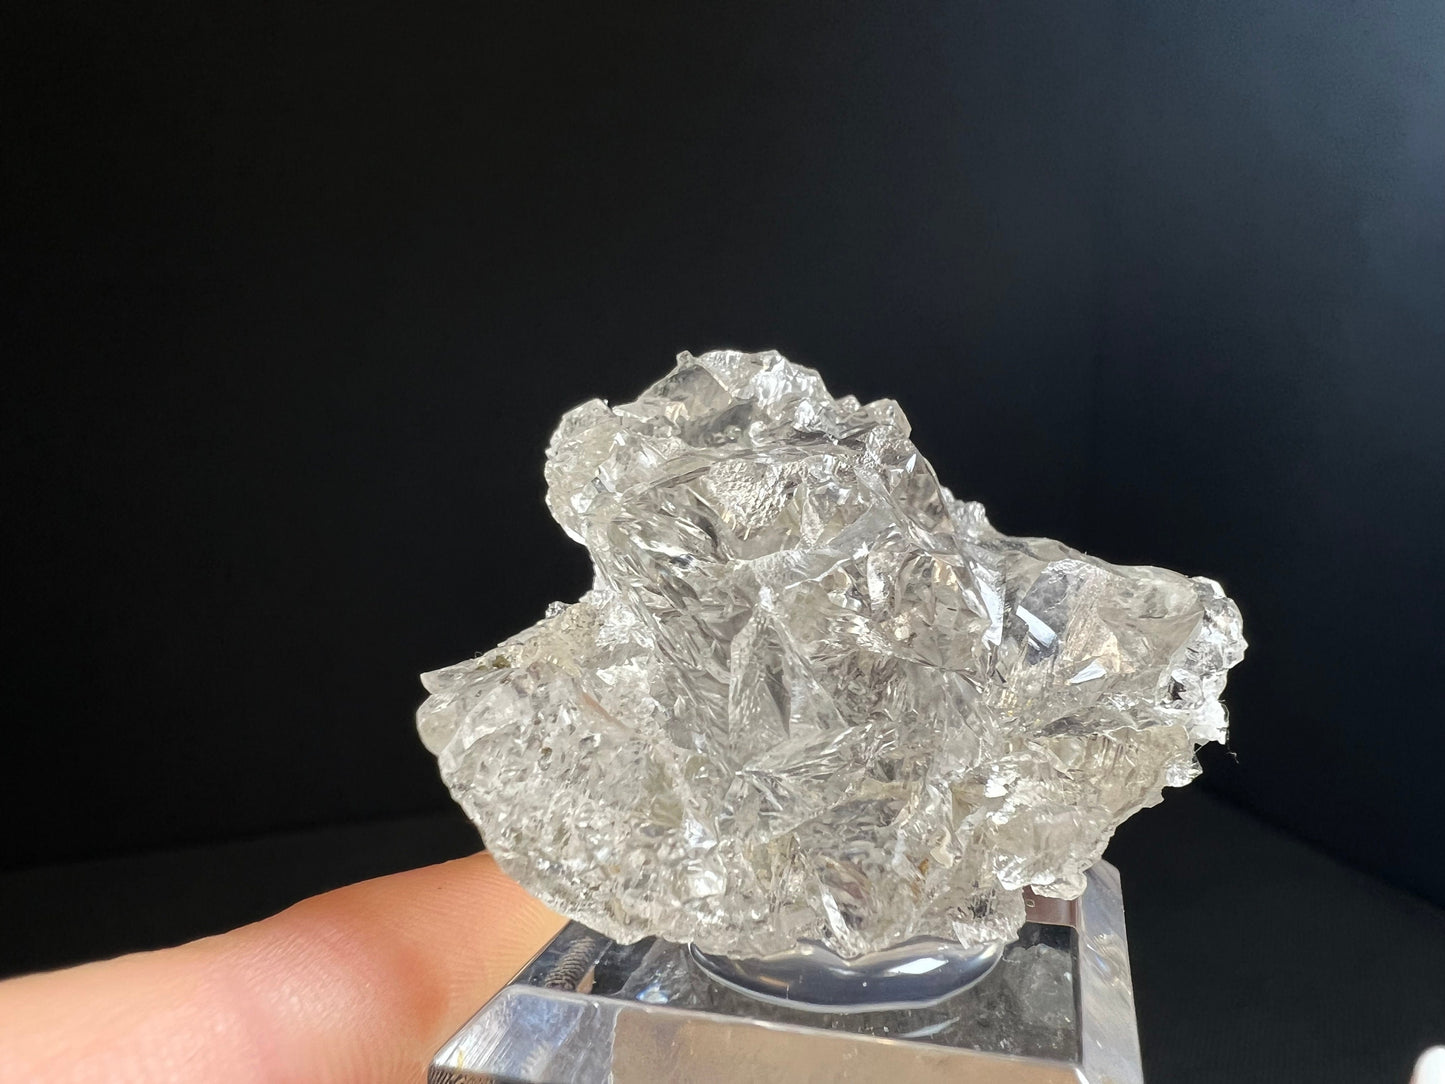 Water Etched Quartz From An Old Collection In Val Di Funes, Trentino Alto Adige, Italy- Collectors Piece, Home Decor